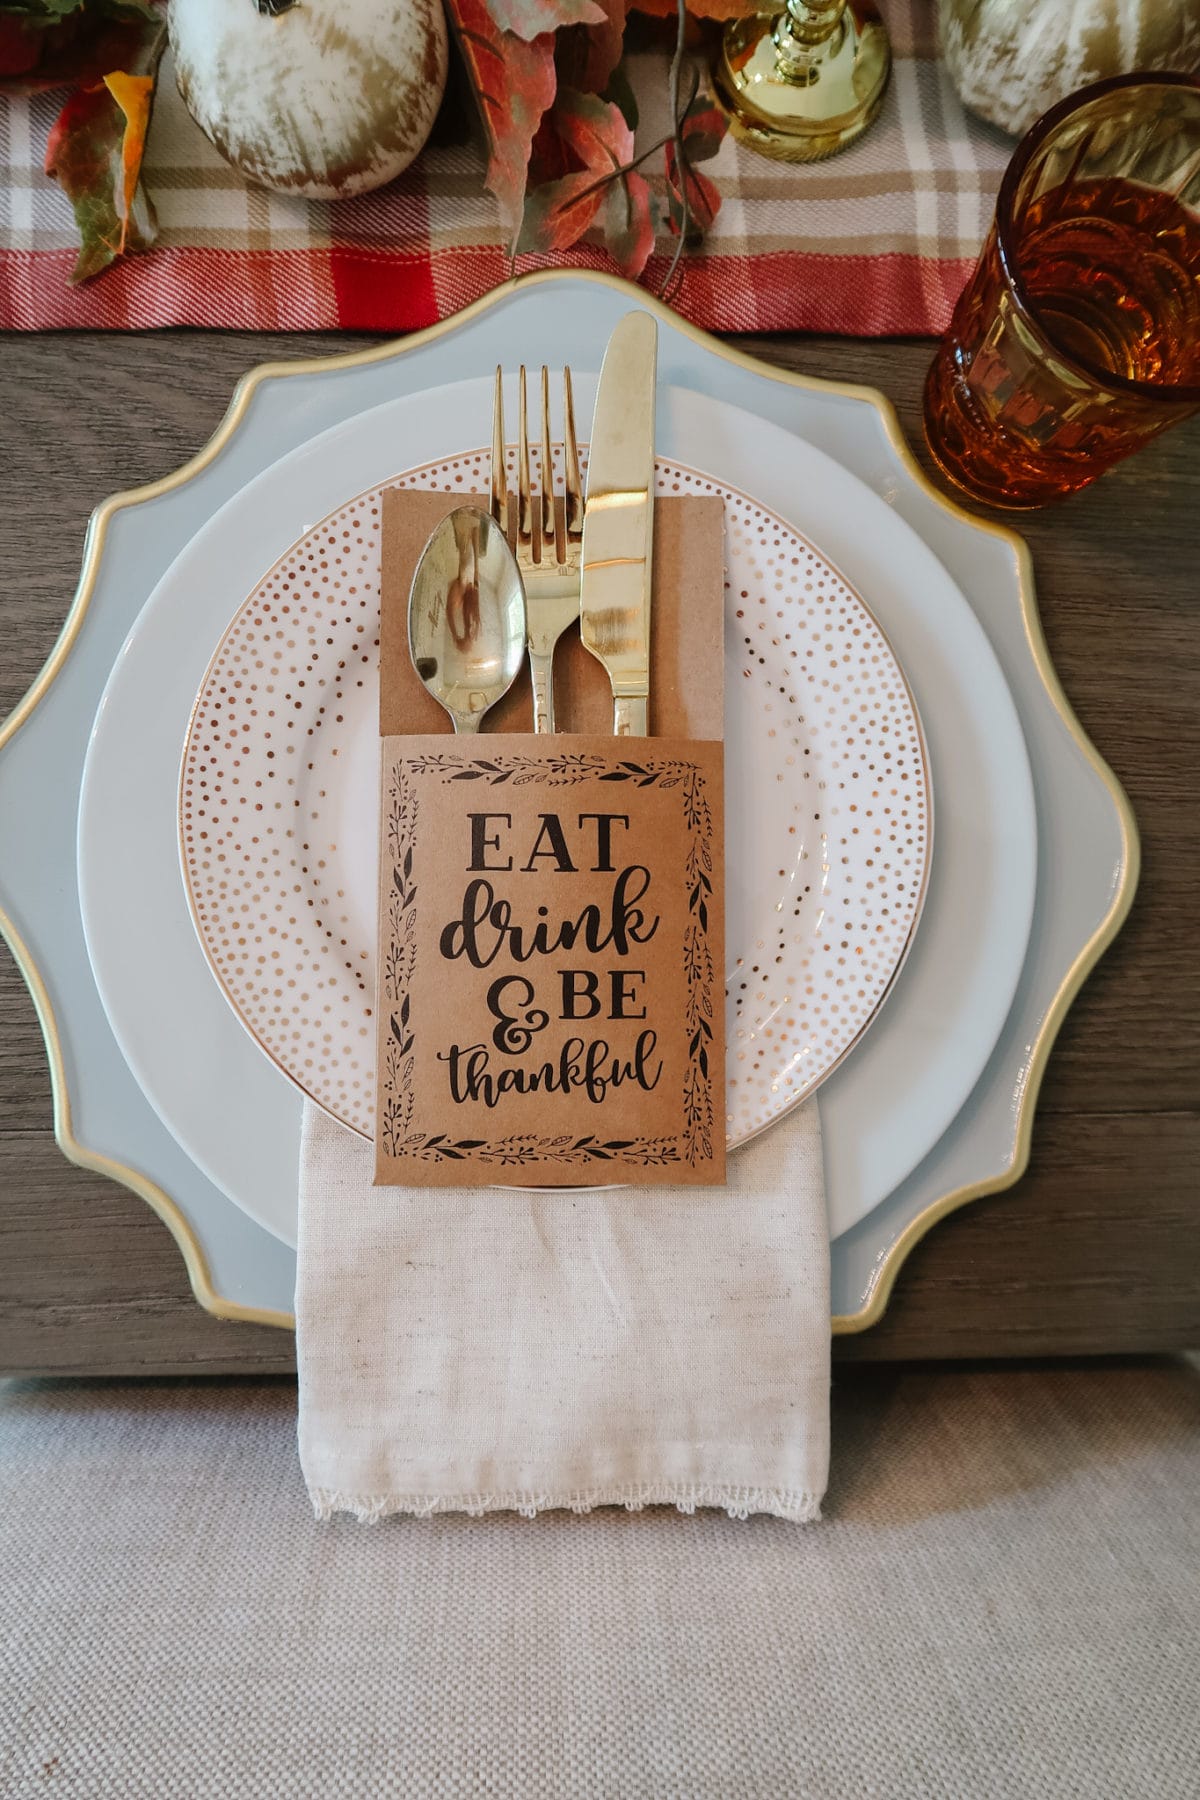 Thanksgiving Tablescapes, Traditional Fall Colors